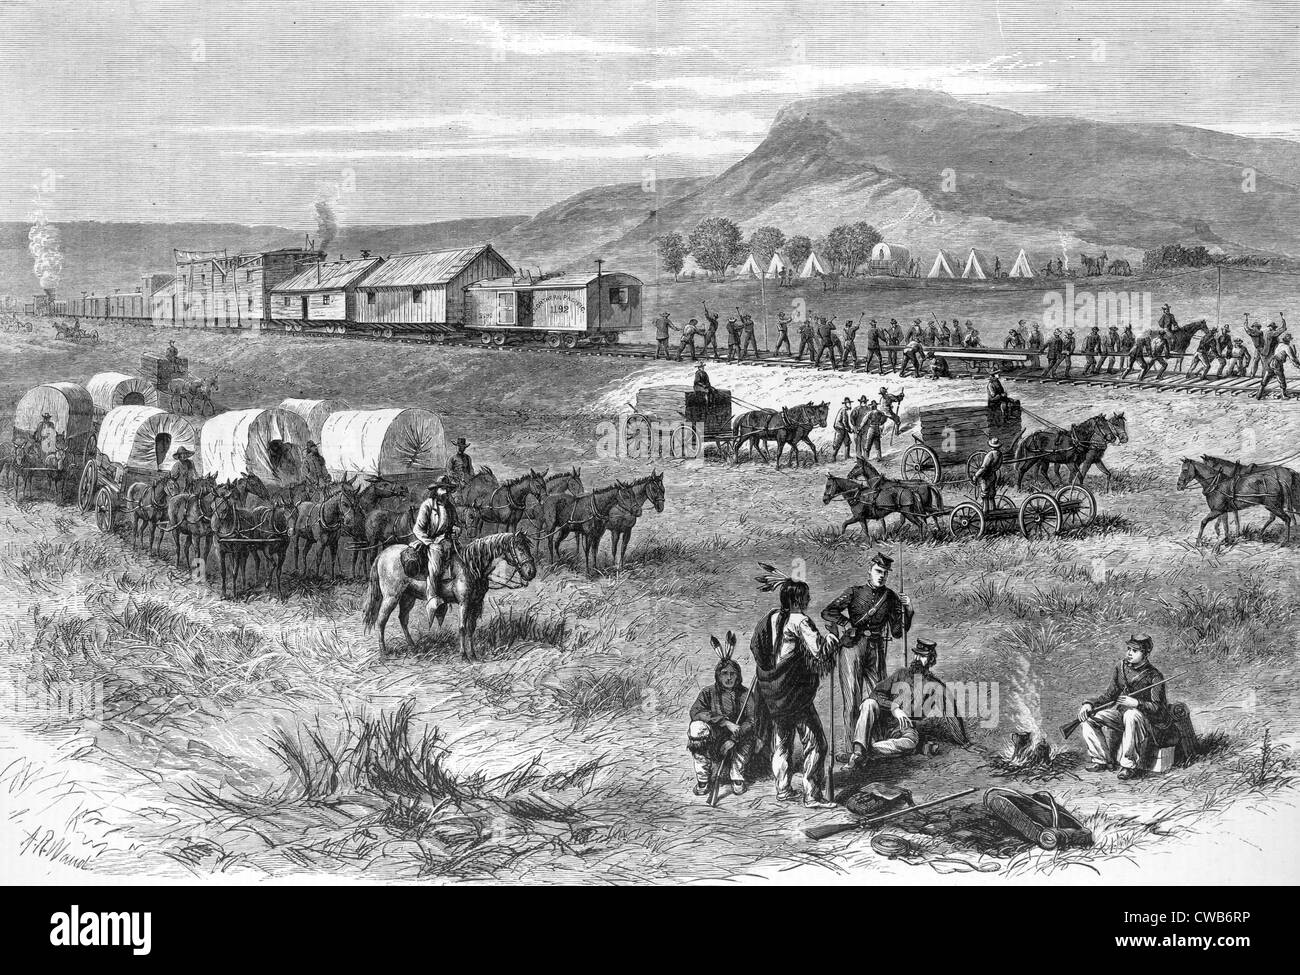 Railroad building on the great plains, wood engraving, by Alfred R. Waud, 1875 Stock Photo